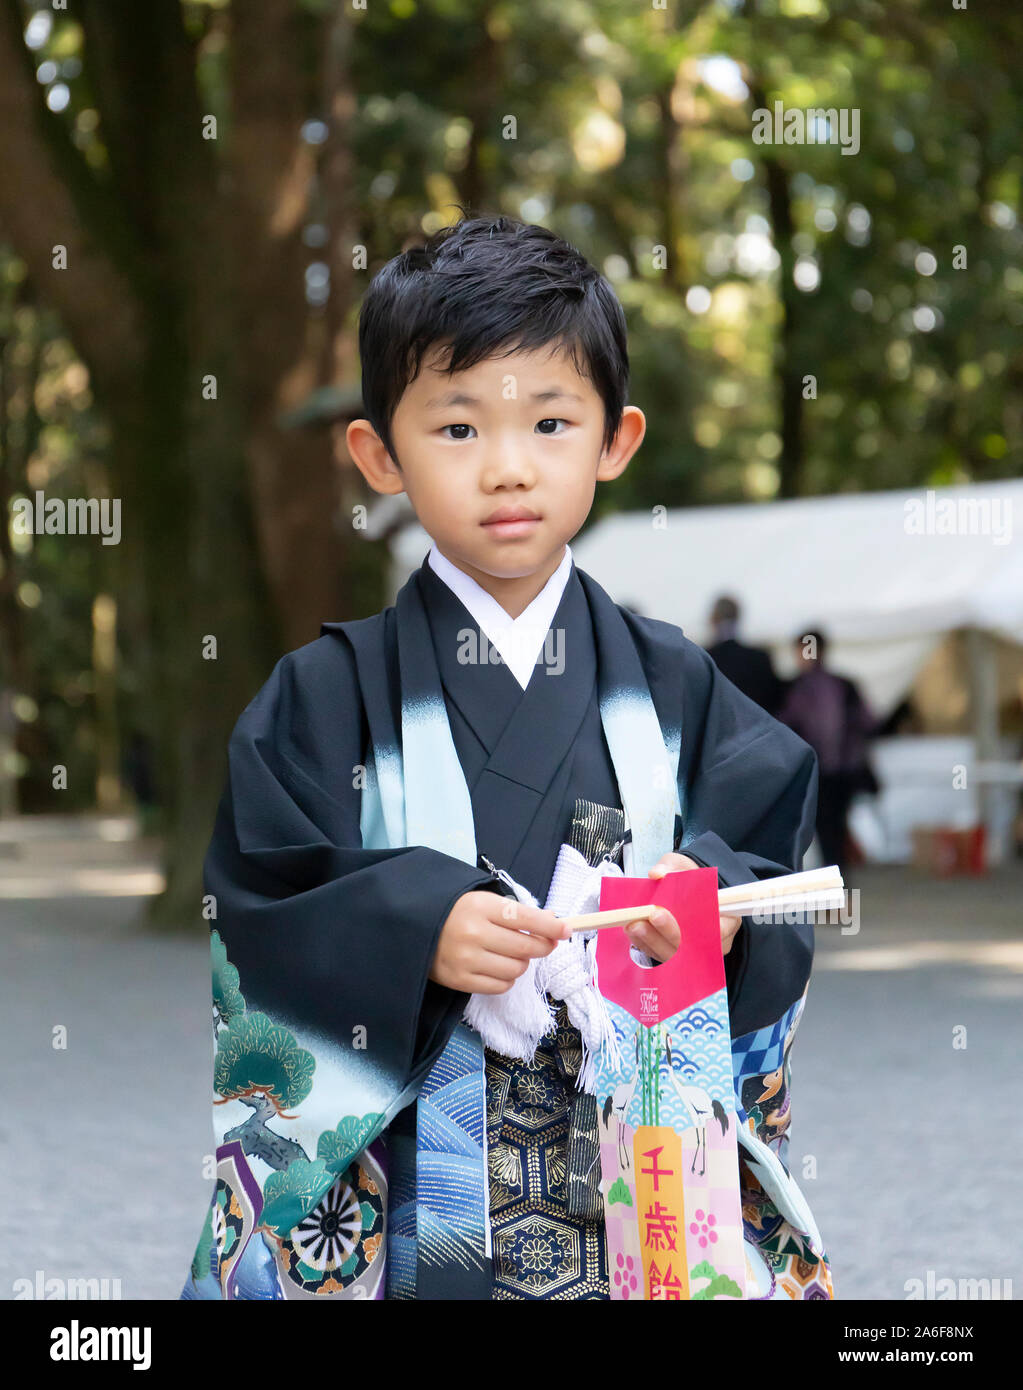 Tokyo, Japan - October 31st, 2018: A japanese boy in a traditional outfit near the Meiji temple in Tokyo, Japan Stock Photo